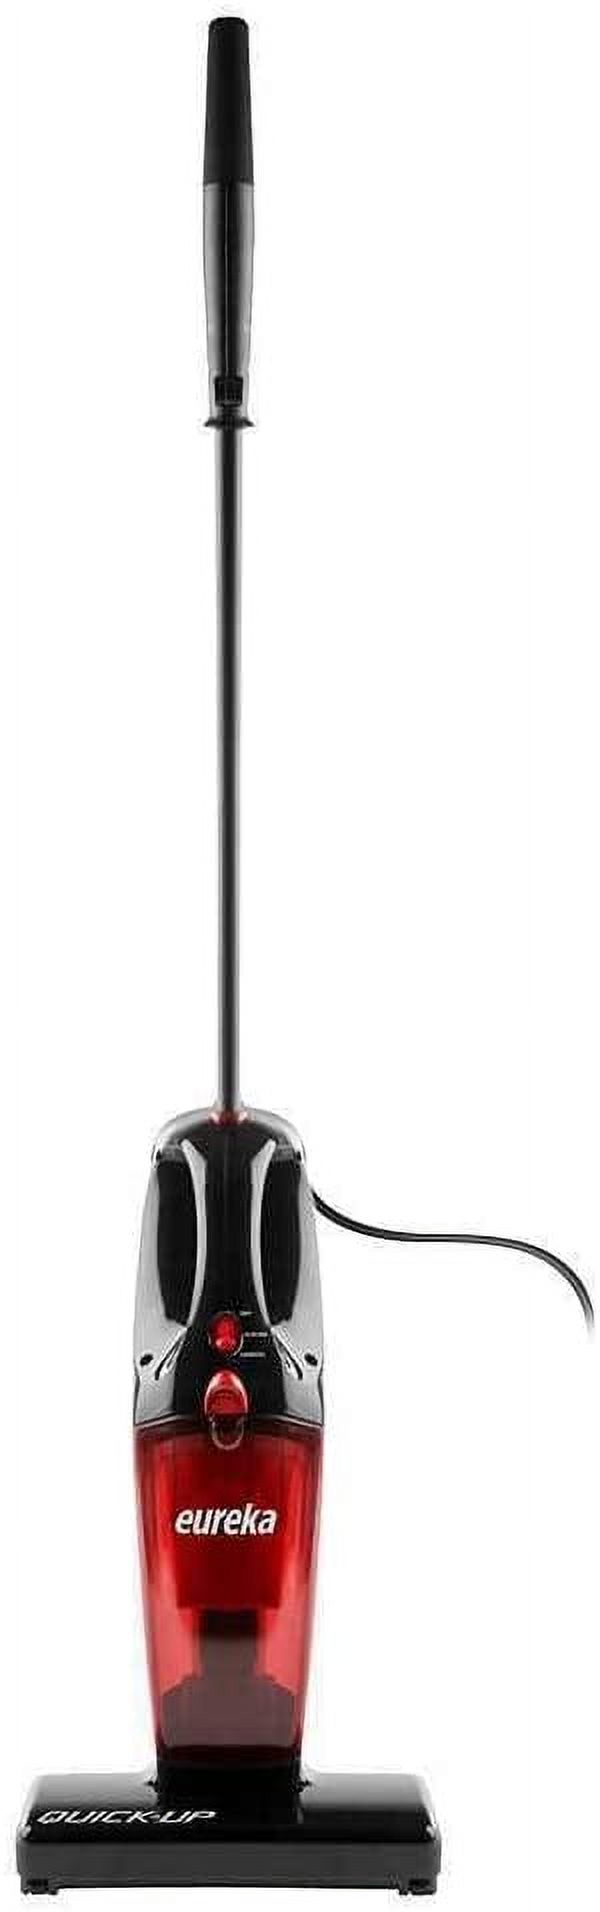 Eureka 169K 2-in-1 Quick-Up Bagless Stick Vacuum Cleaner for Bare Floors and Rugs, Light Red - image 1 of 5